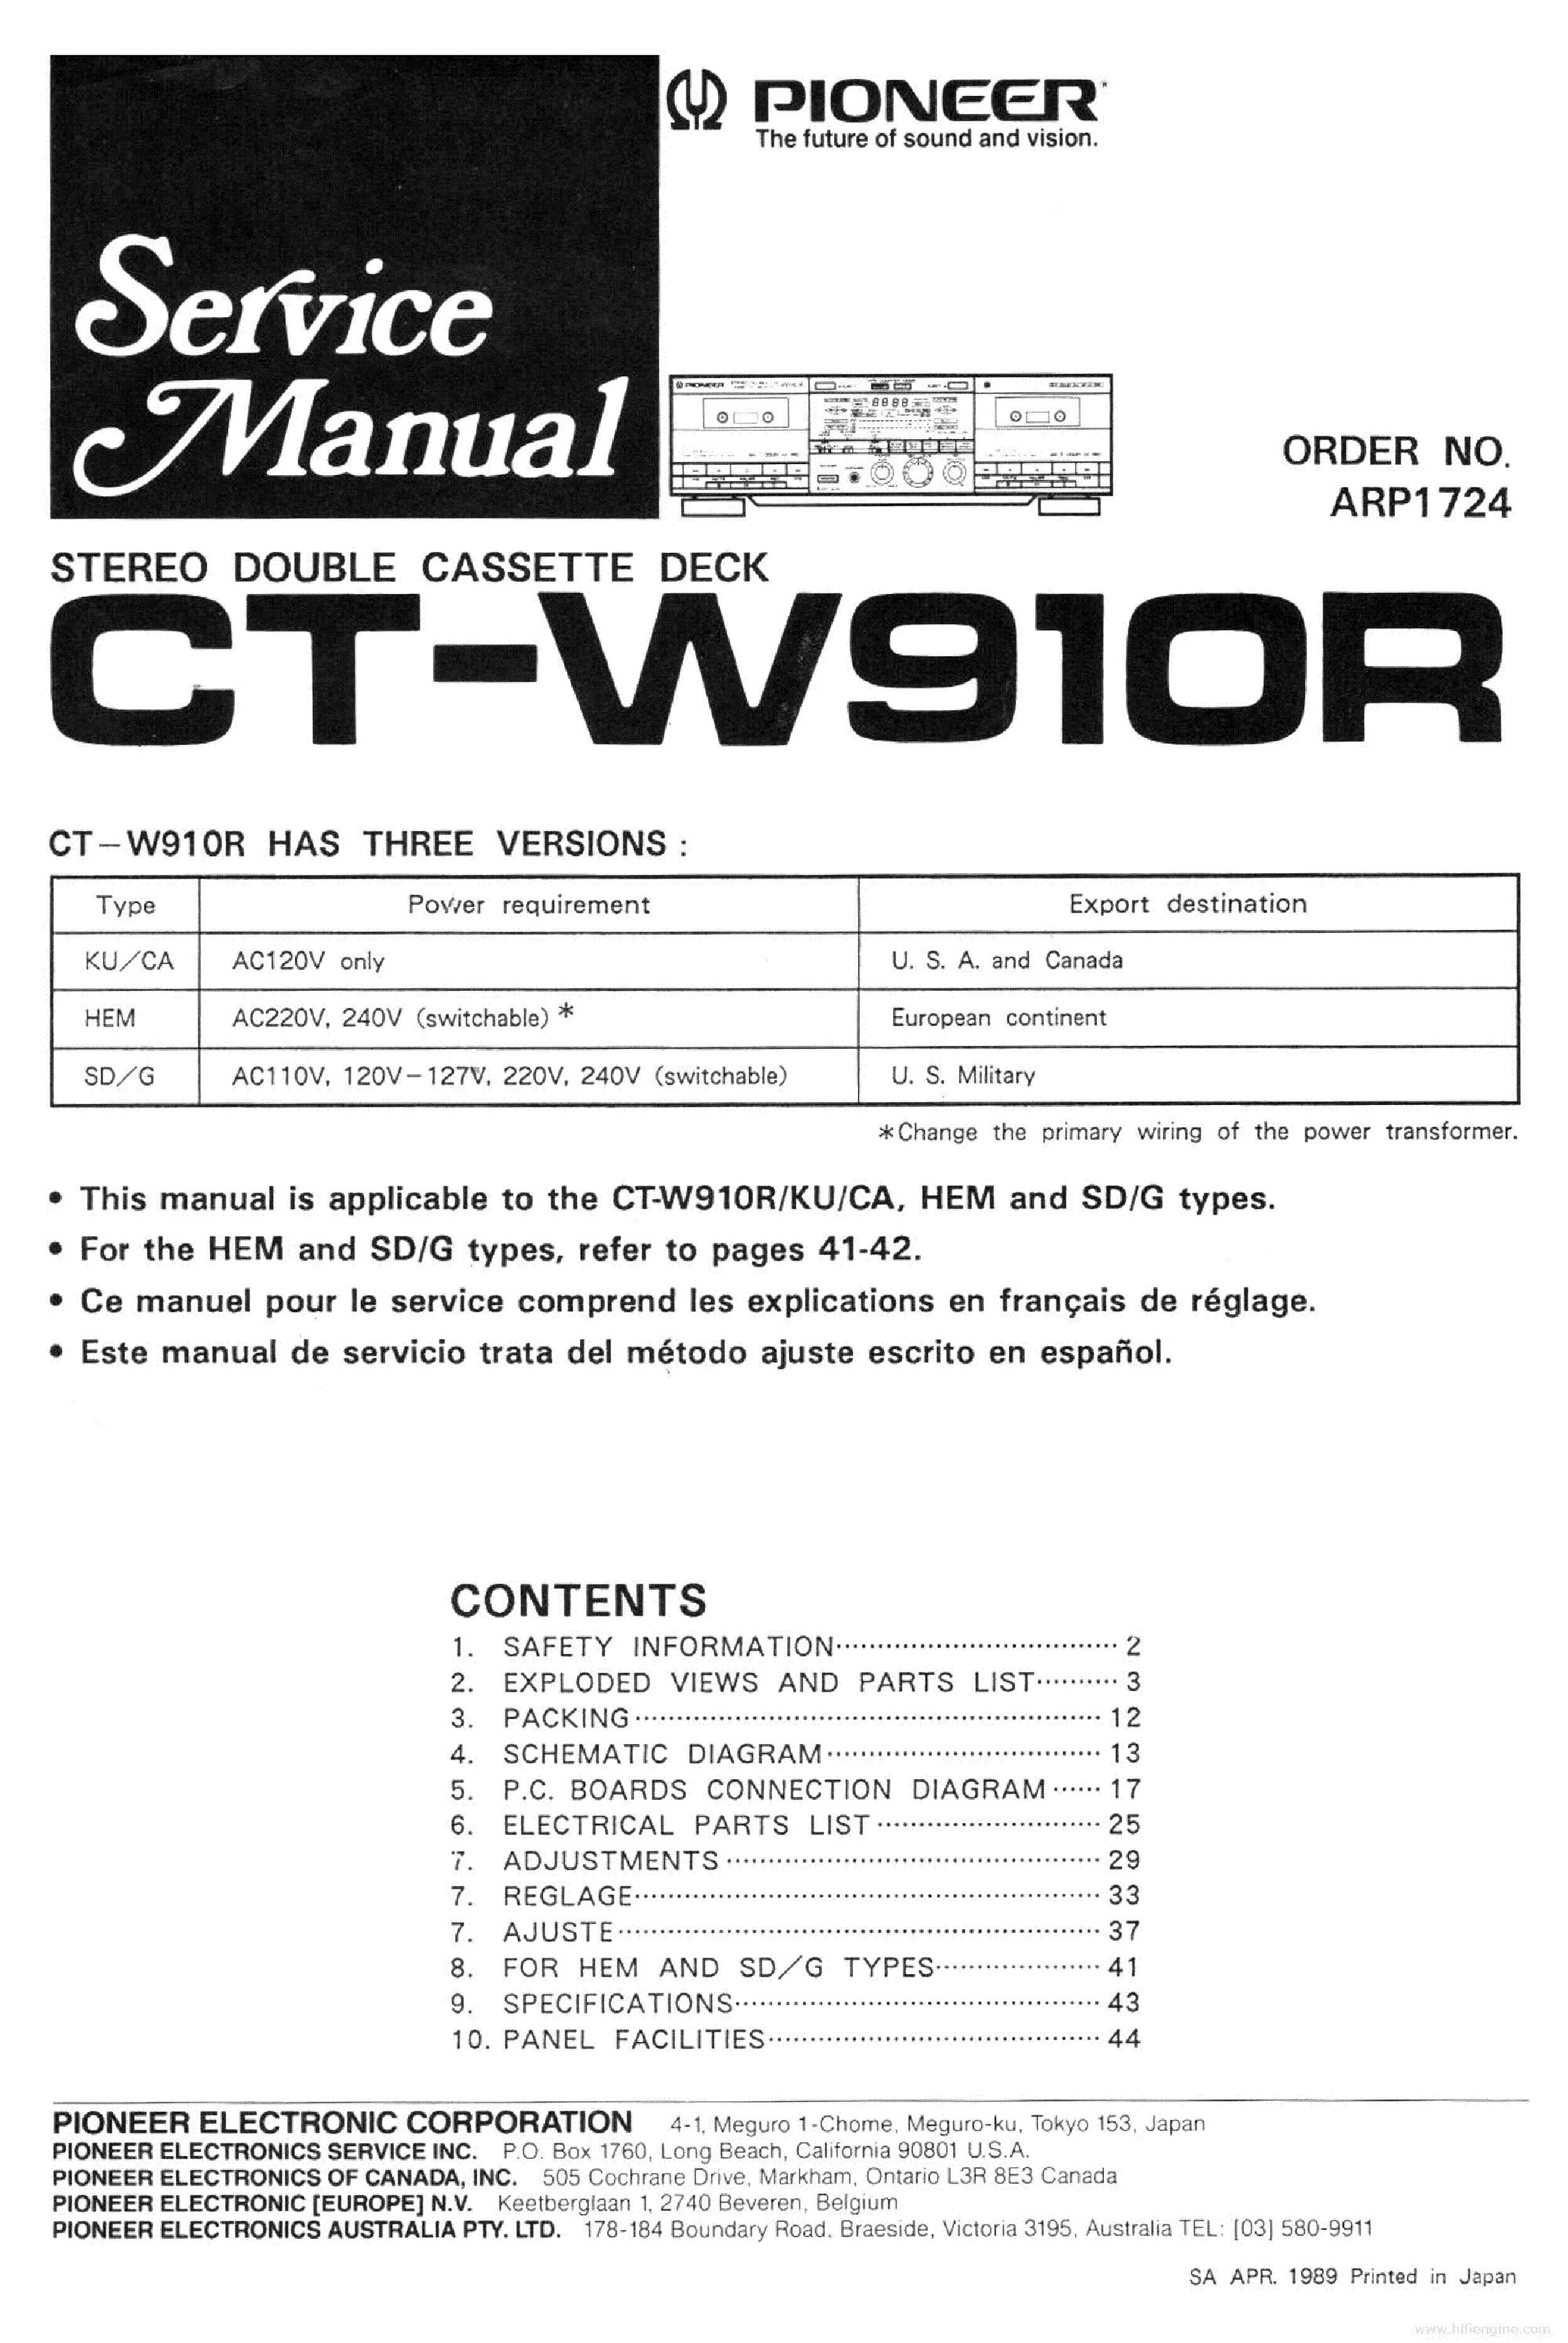 PIONEER CT-W910R STEREO DOUBLE CASSETTE DECK ARP1724 1989 SM service manual (1st page)